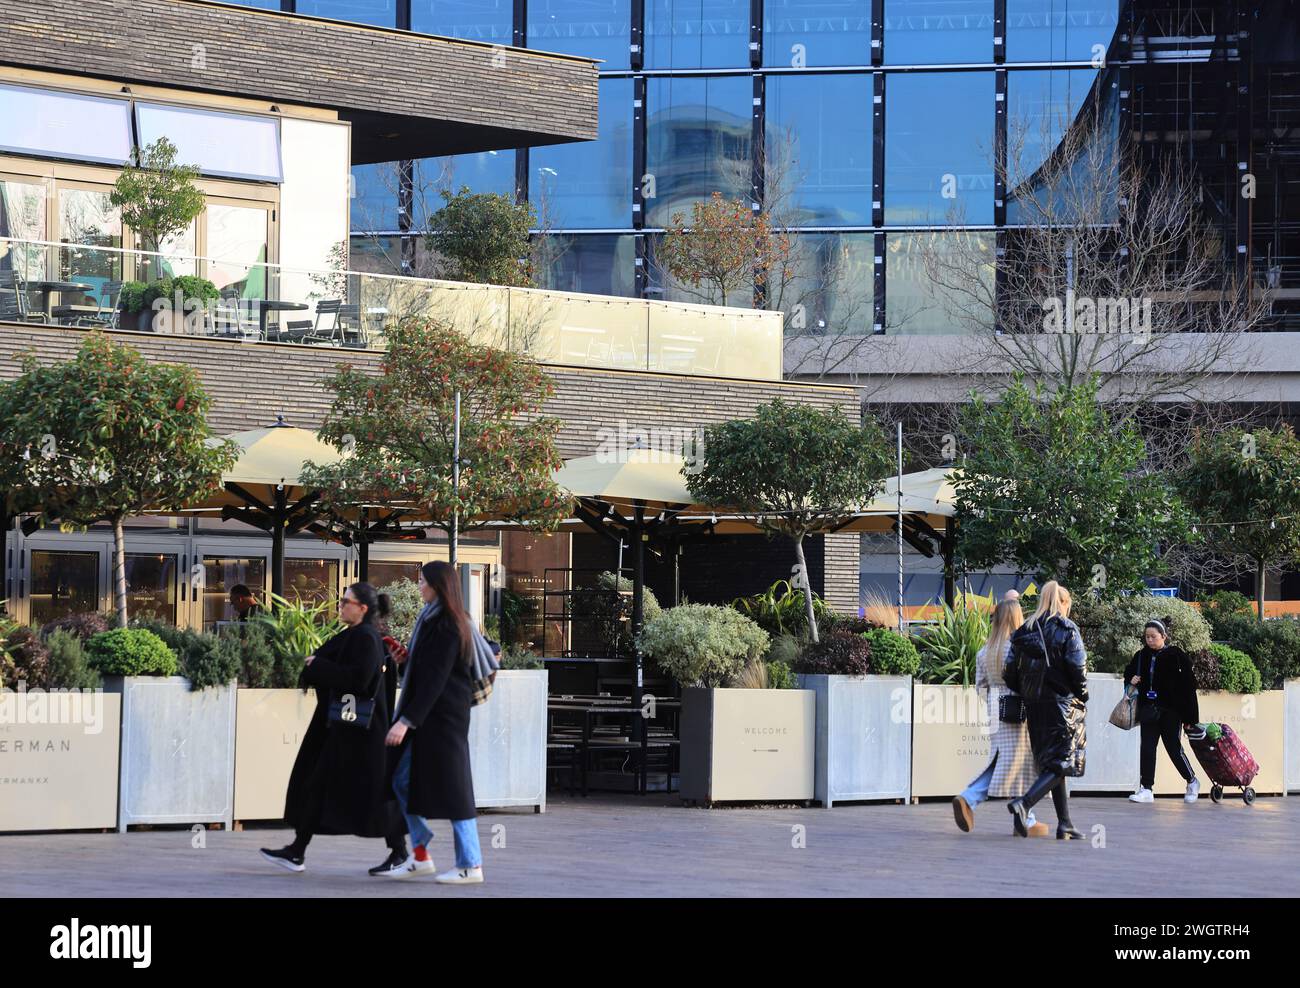 Lighterman restaurant on Granary Square, with the new Google HQ beyond, on Goods Way, Kings Cross, north London, UK Stock Photo